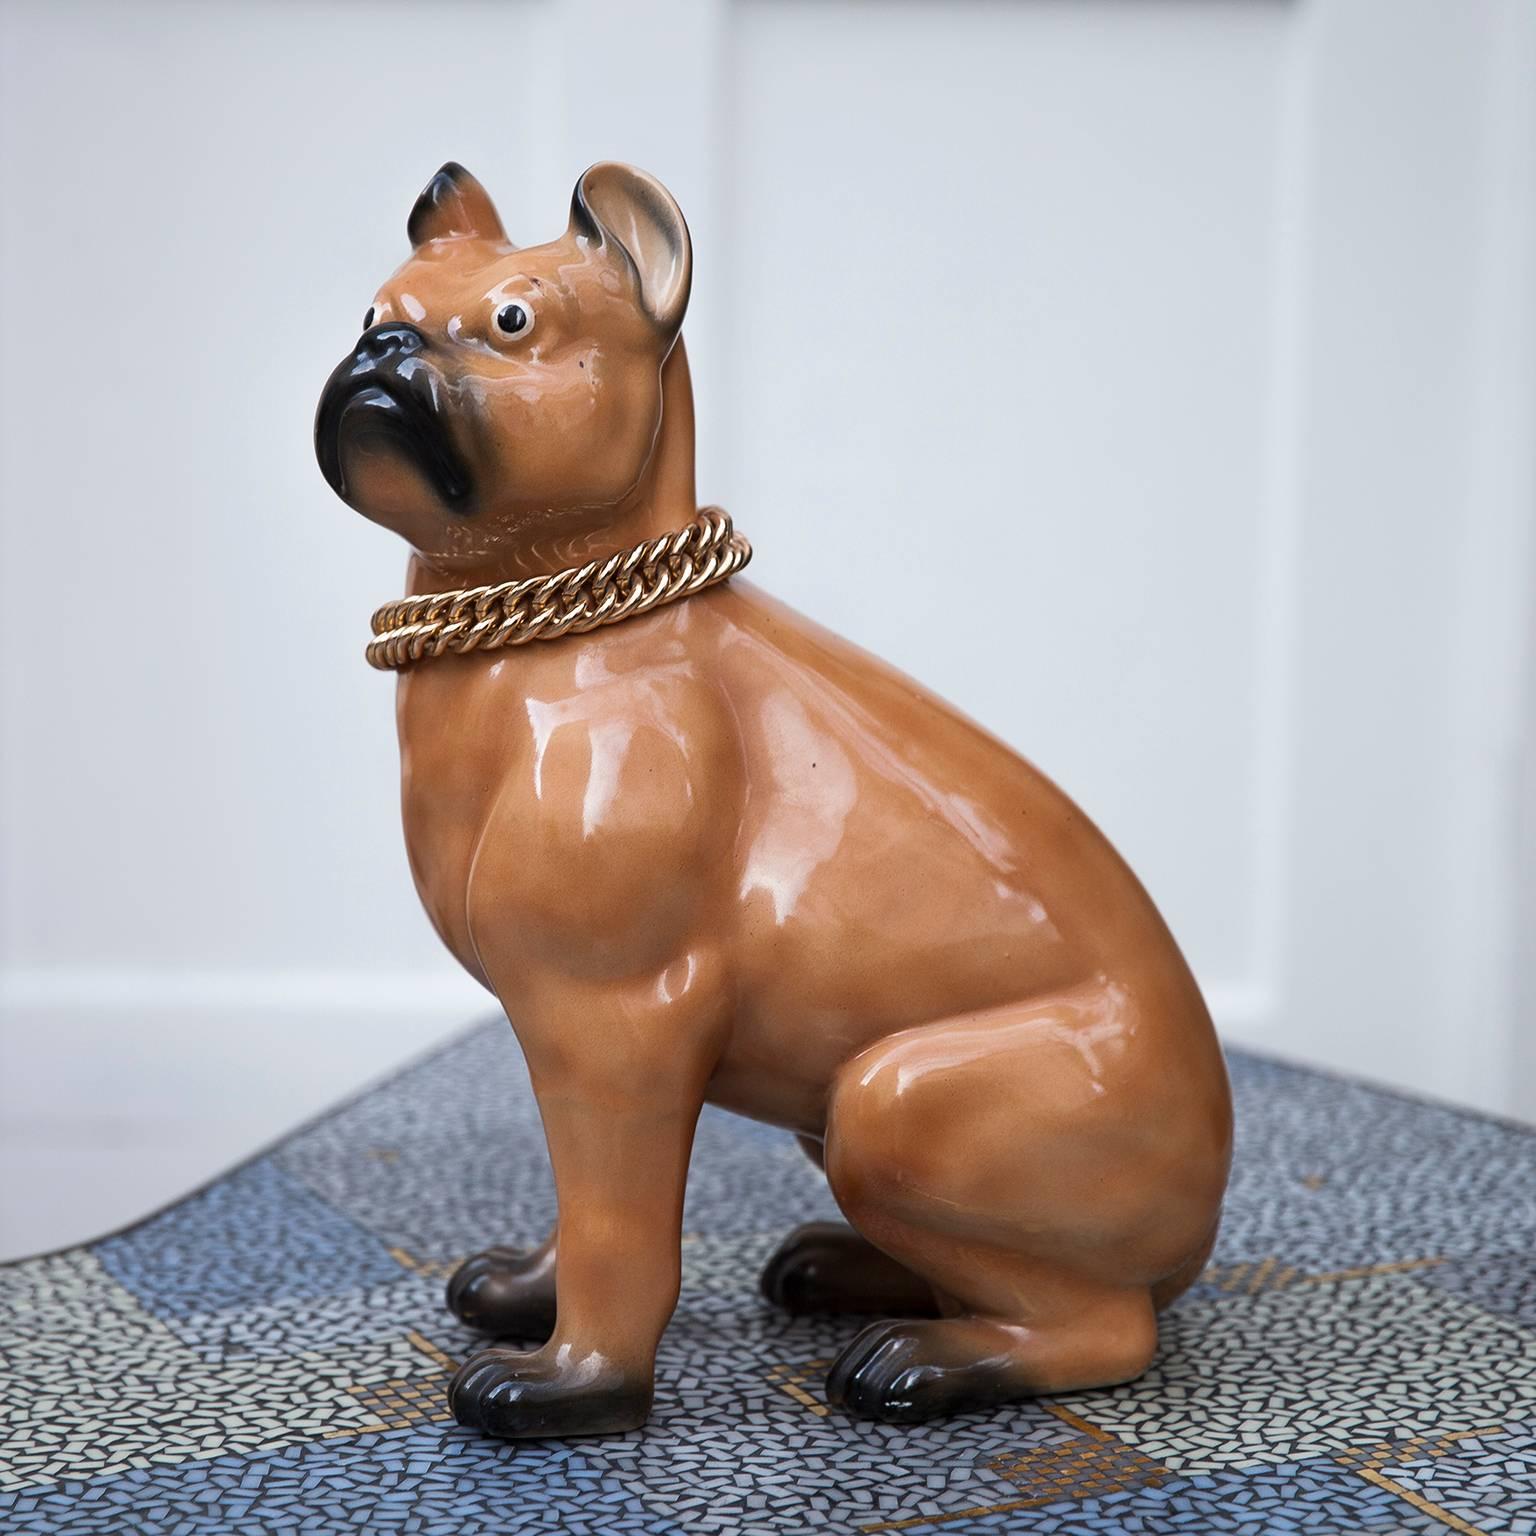 French bulldog figure by Piero Fornasetti in glazed porcelain and gold metal chain, Milan, Italy, retailed by Anita Kott from 1970s
The figure wears a gold, metal neck chain, with two Fornasetti Milano marks on the base.
H 39, B 15, D 22.5 cm.